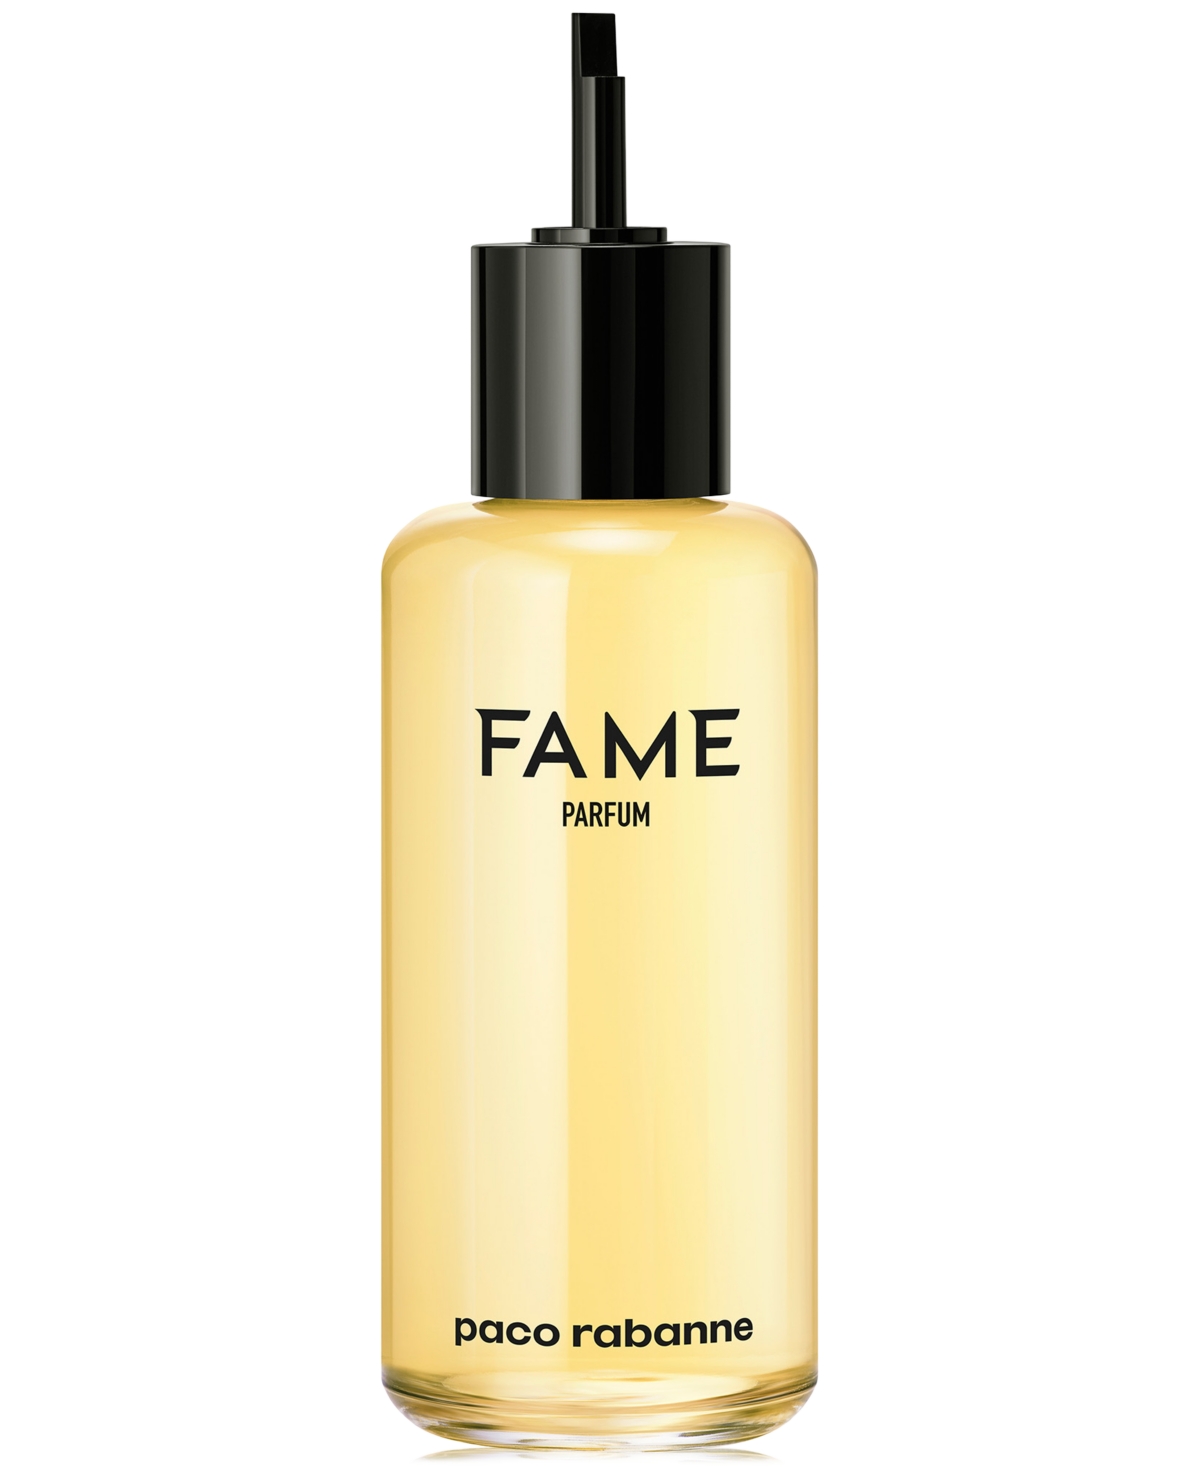 Fame Parfum Refill, 6.8 oz., Created for Macy's